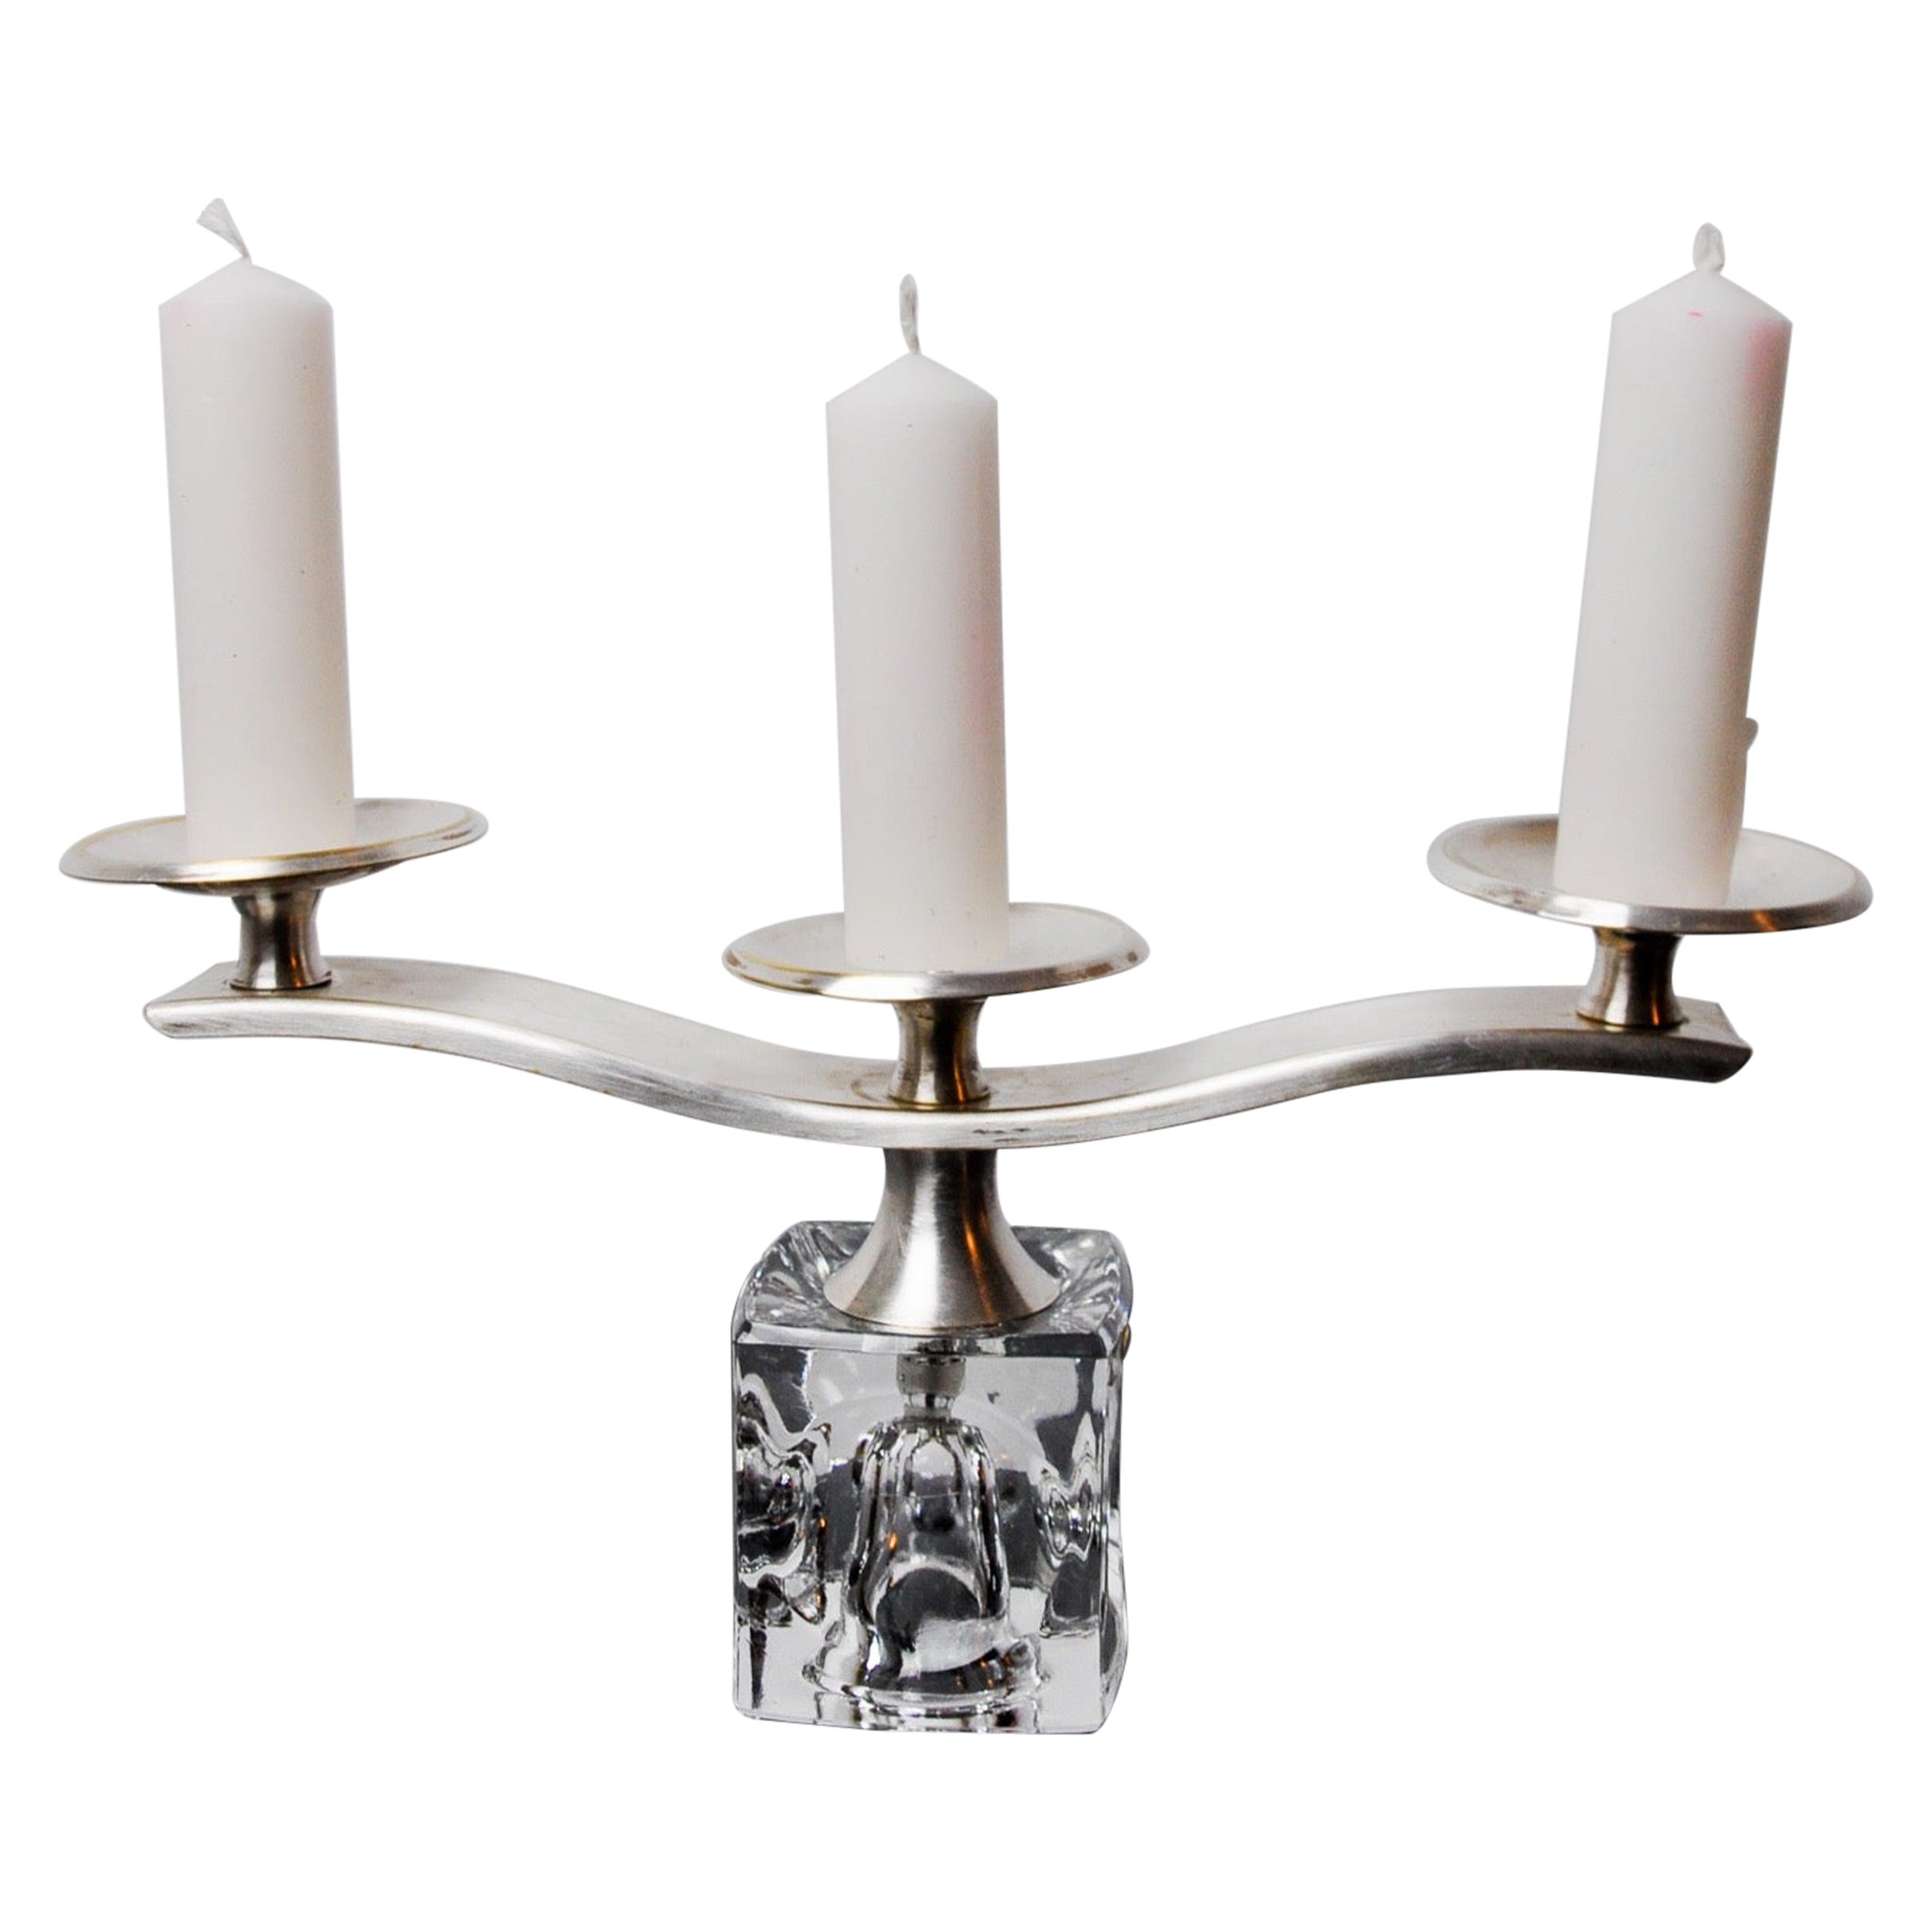 Ice cube candle holder by Peill&Putzler, 3 flames, glass and silver-plated metal